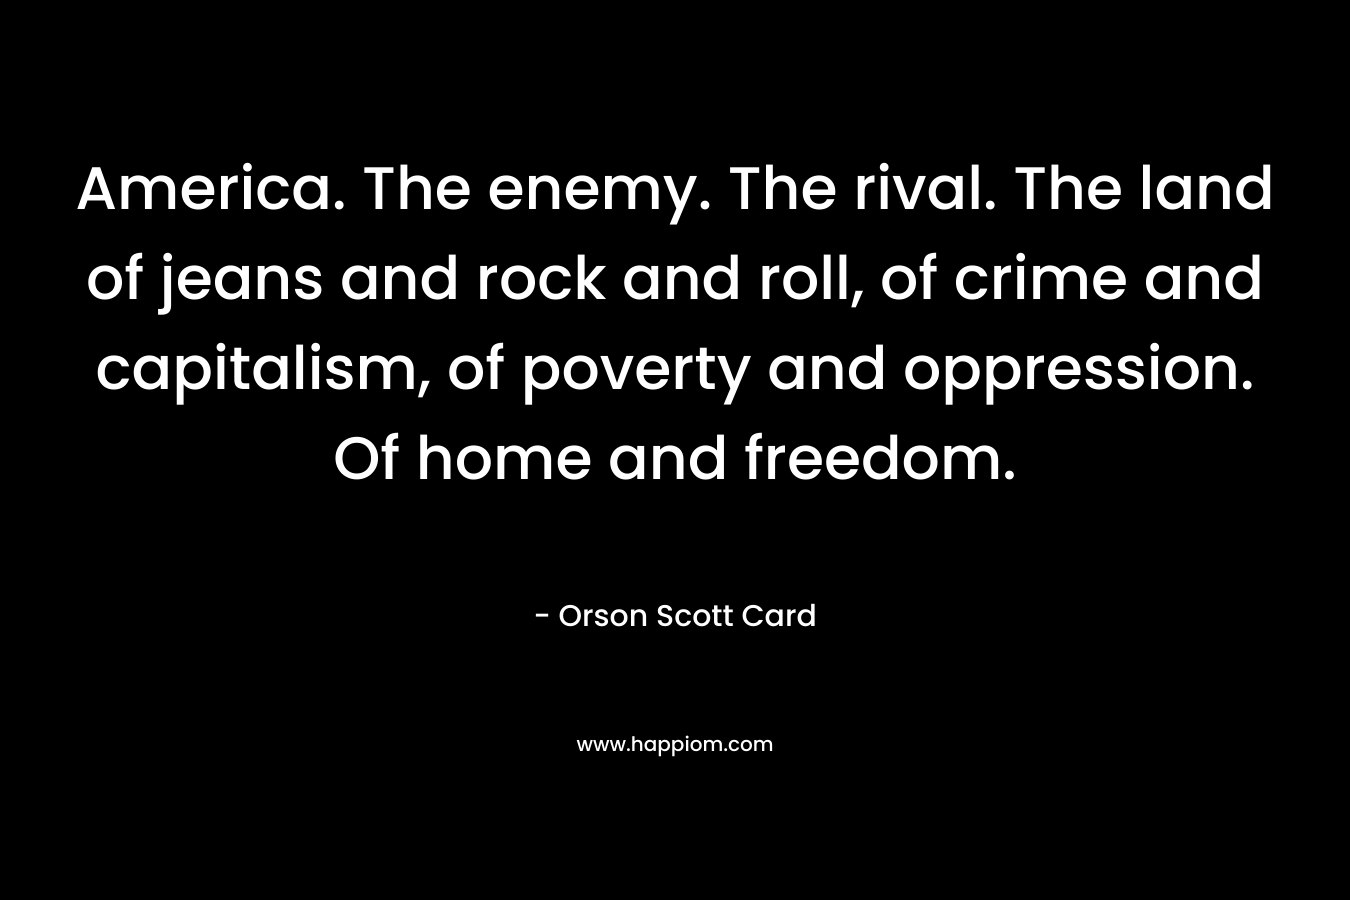 America. The enemy. The rival. The land of jeans and rock and roll, of crime and capitalism, of poverty and oppression. Of home and freedom.